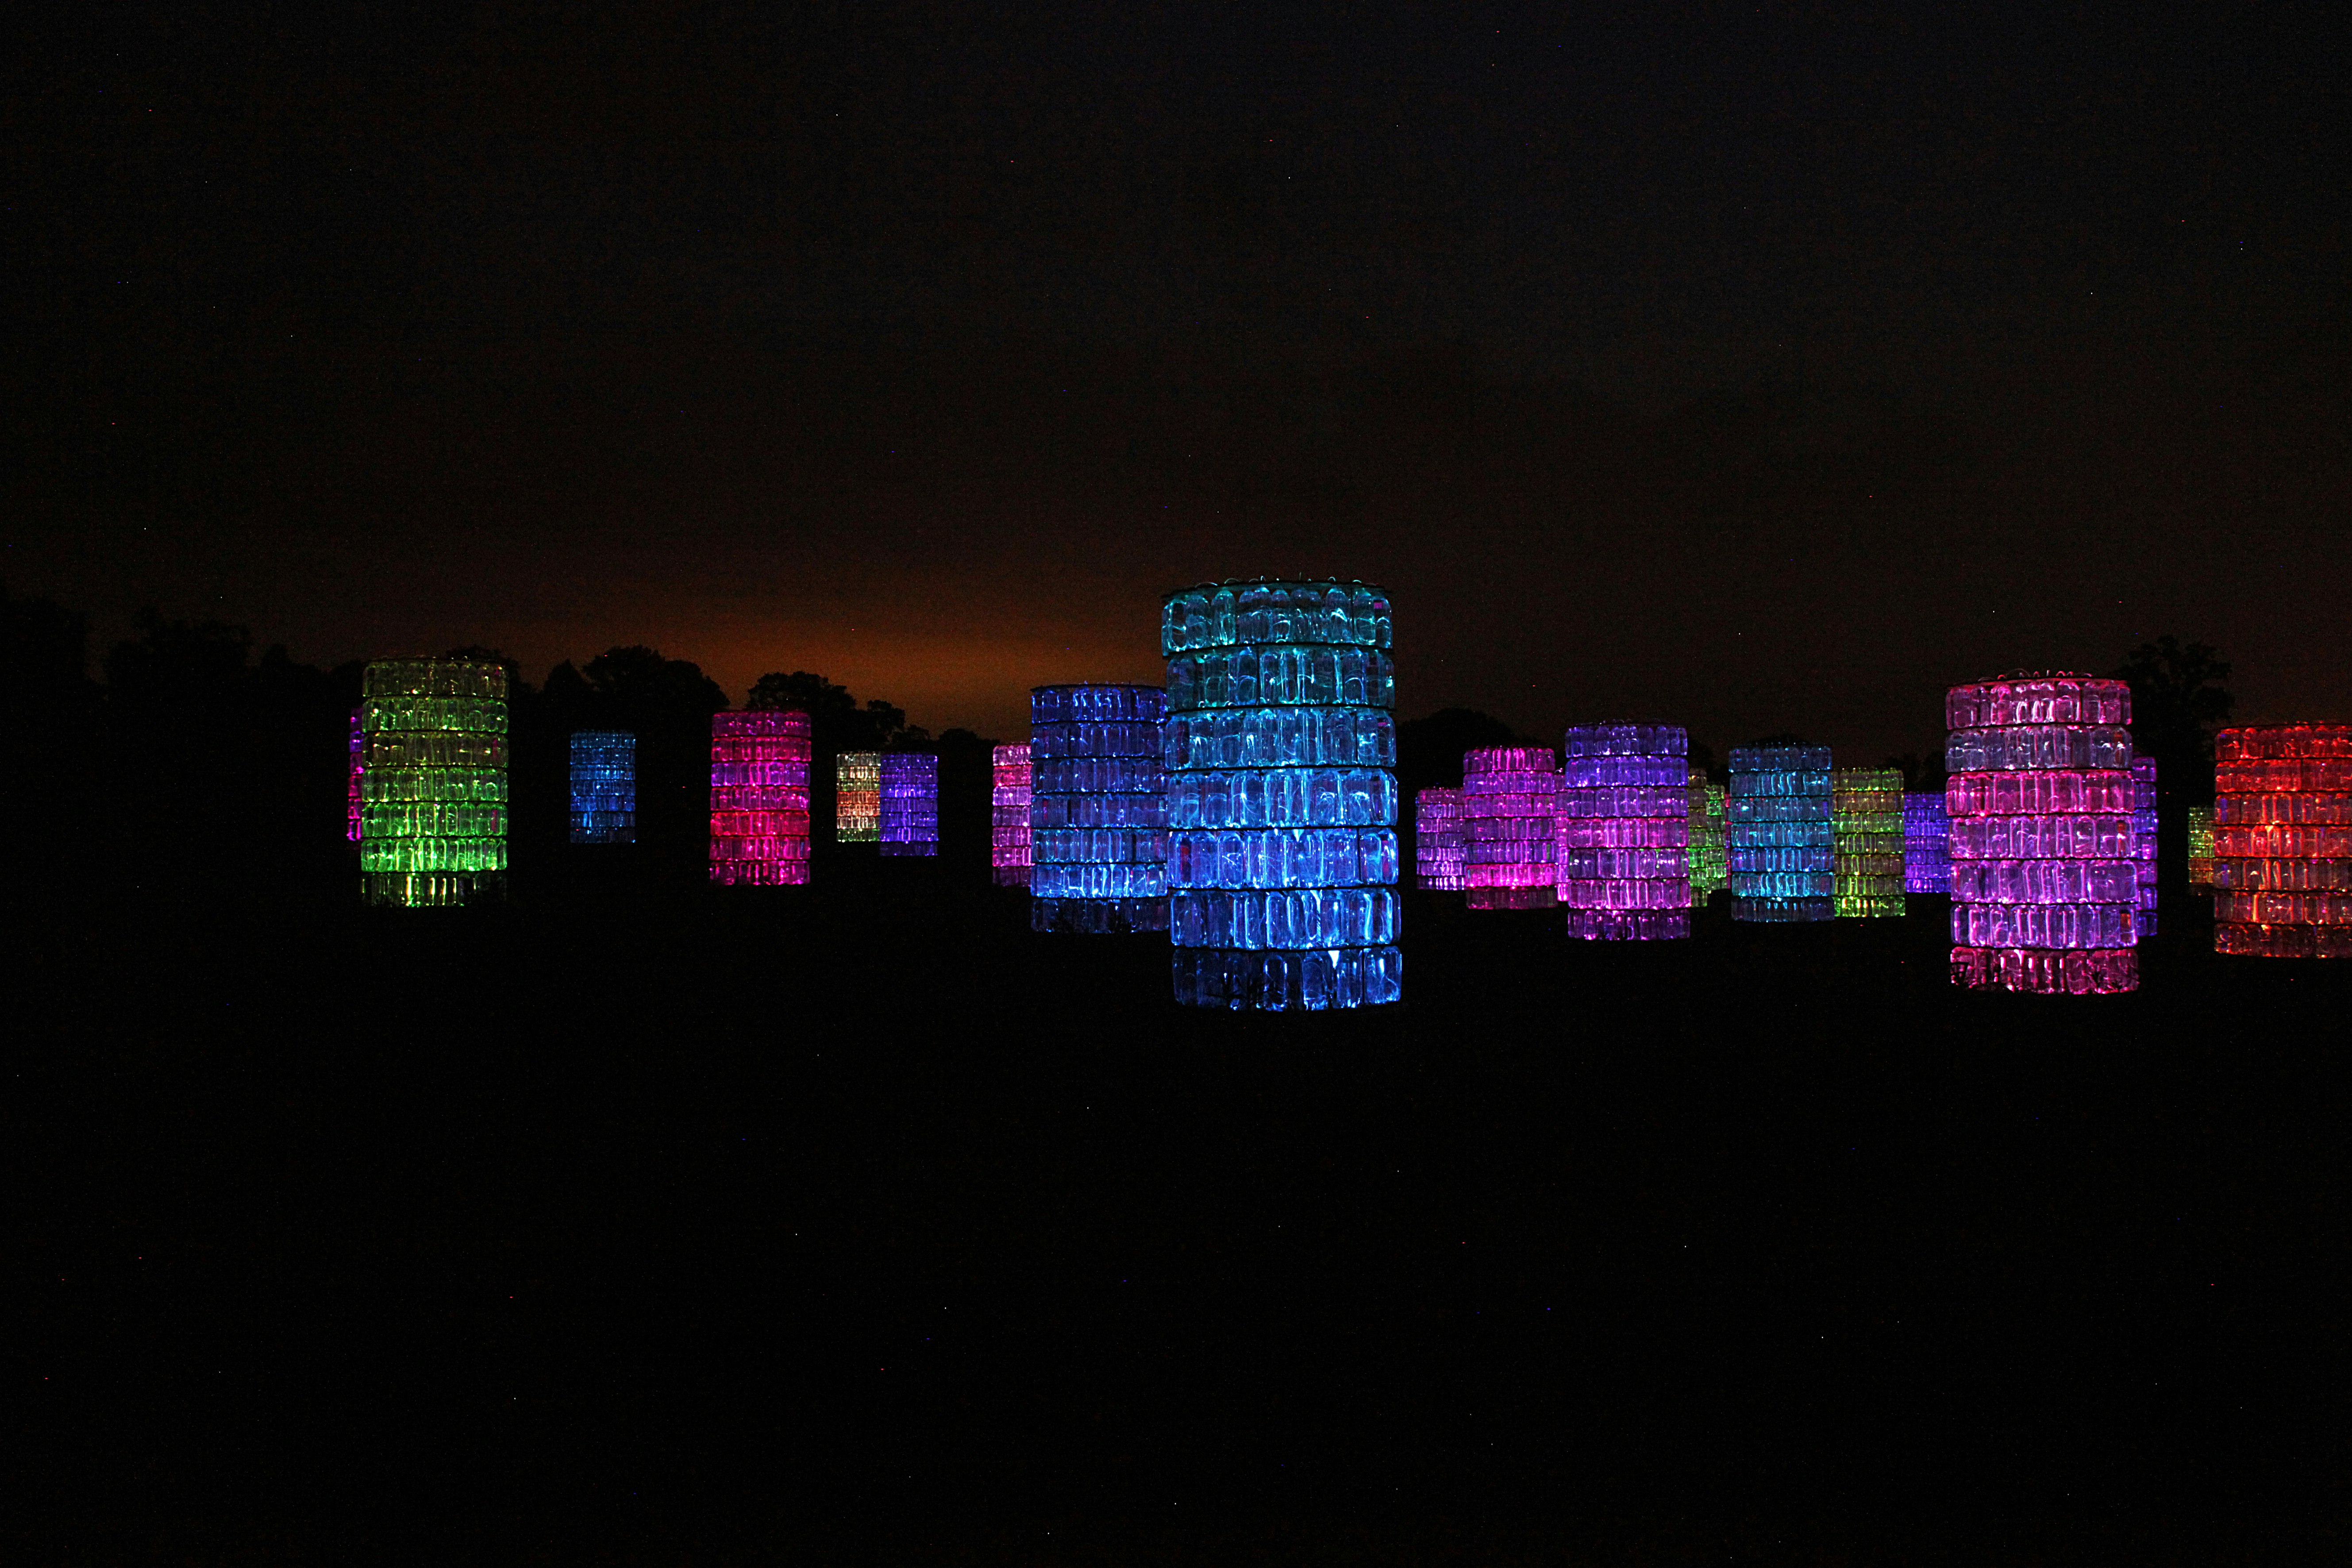 A cluster of water towers illuminated with multicolored lights